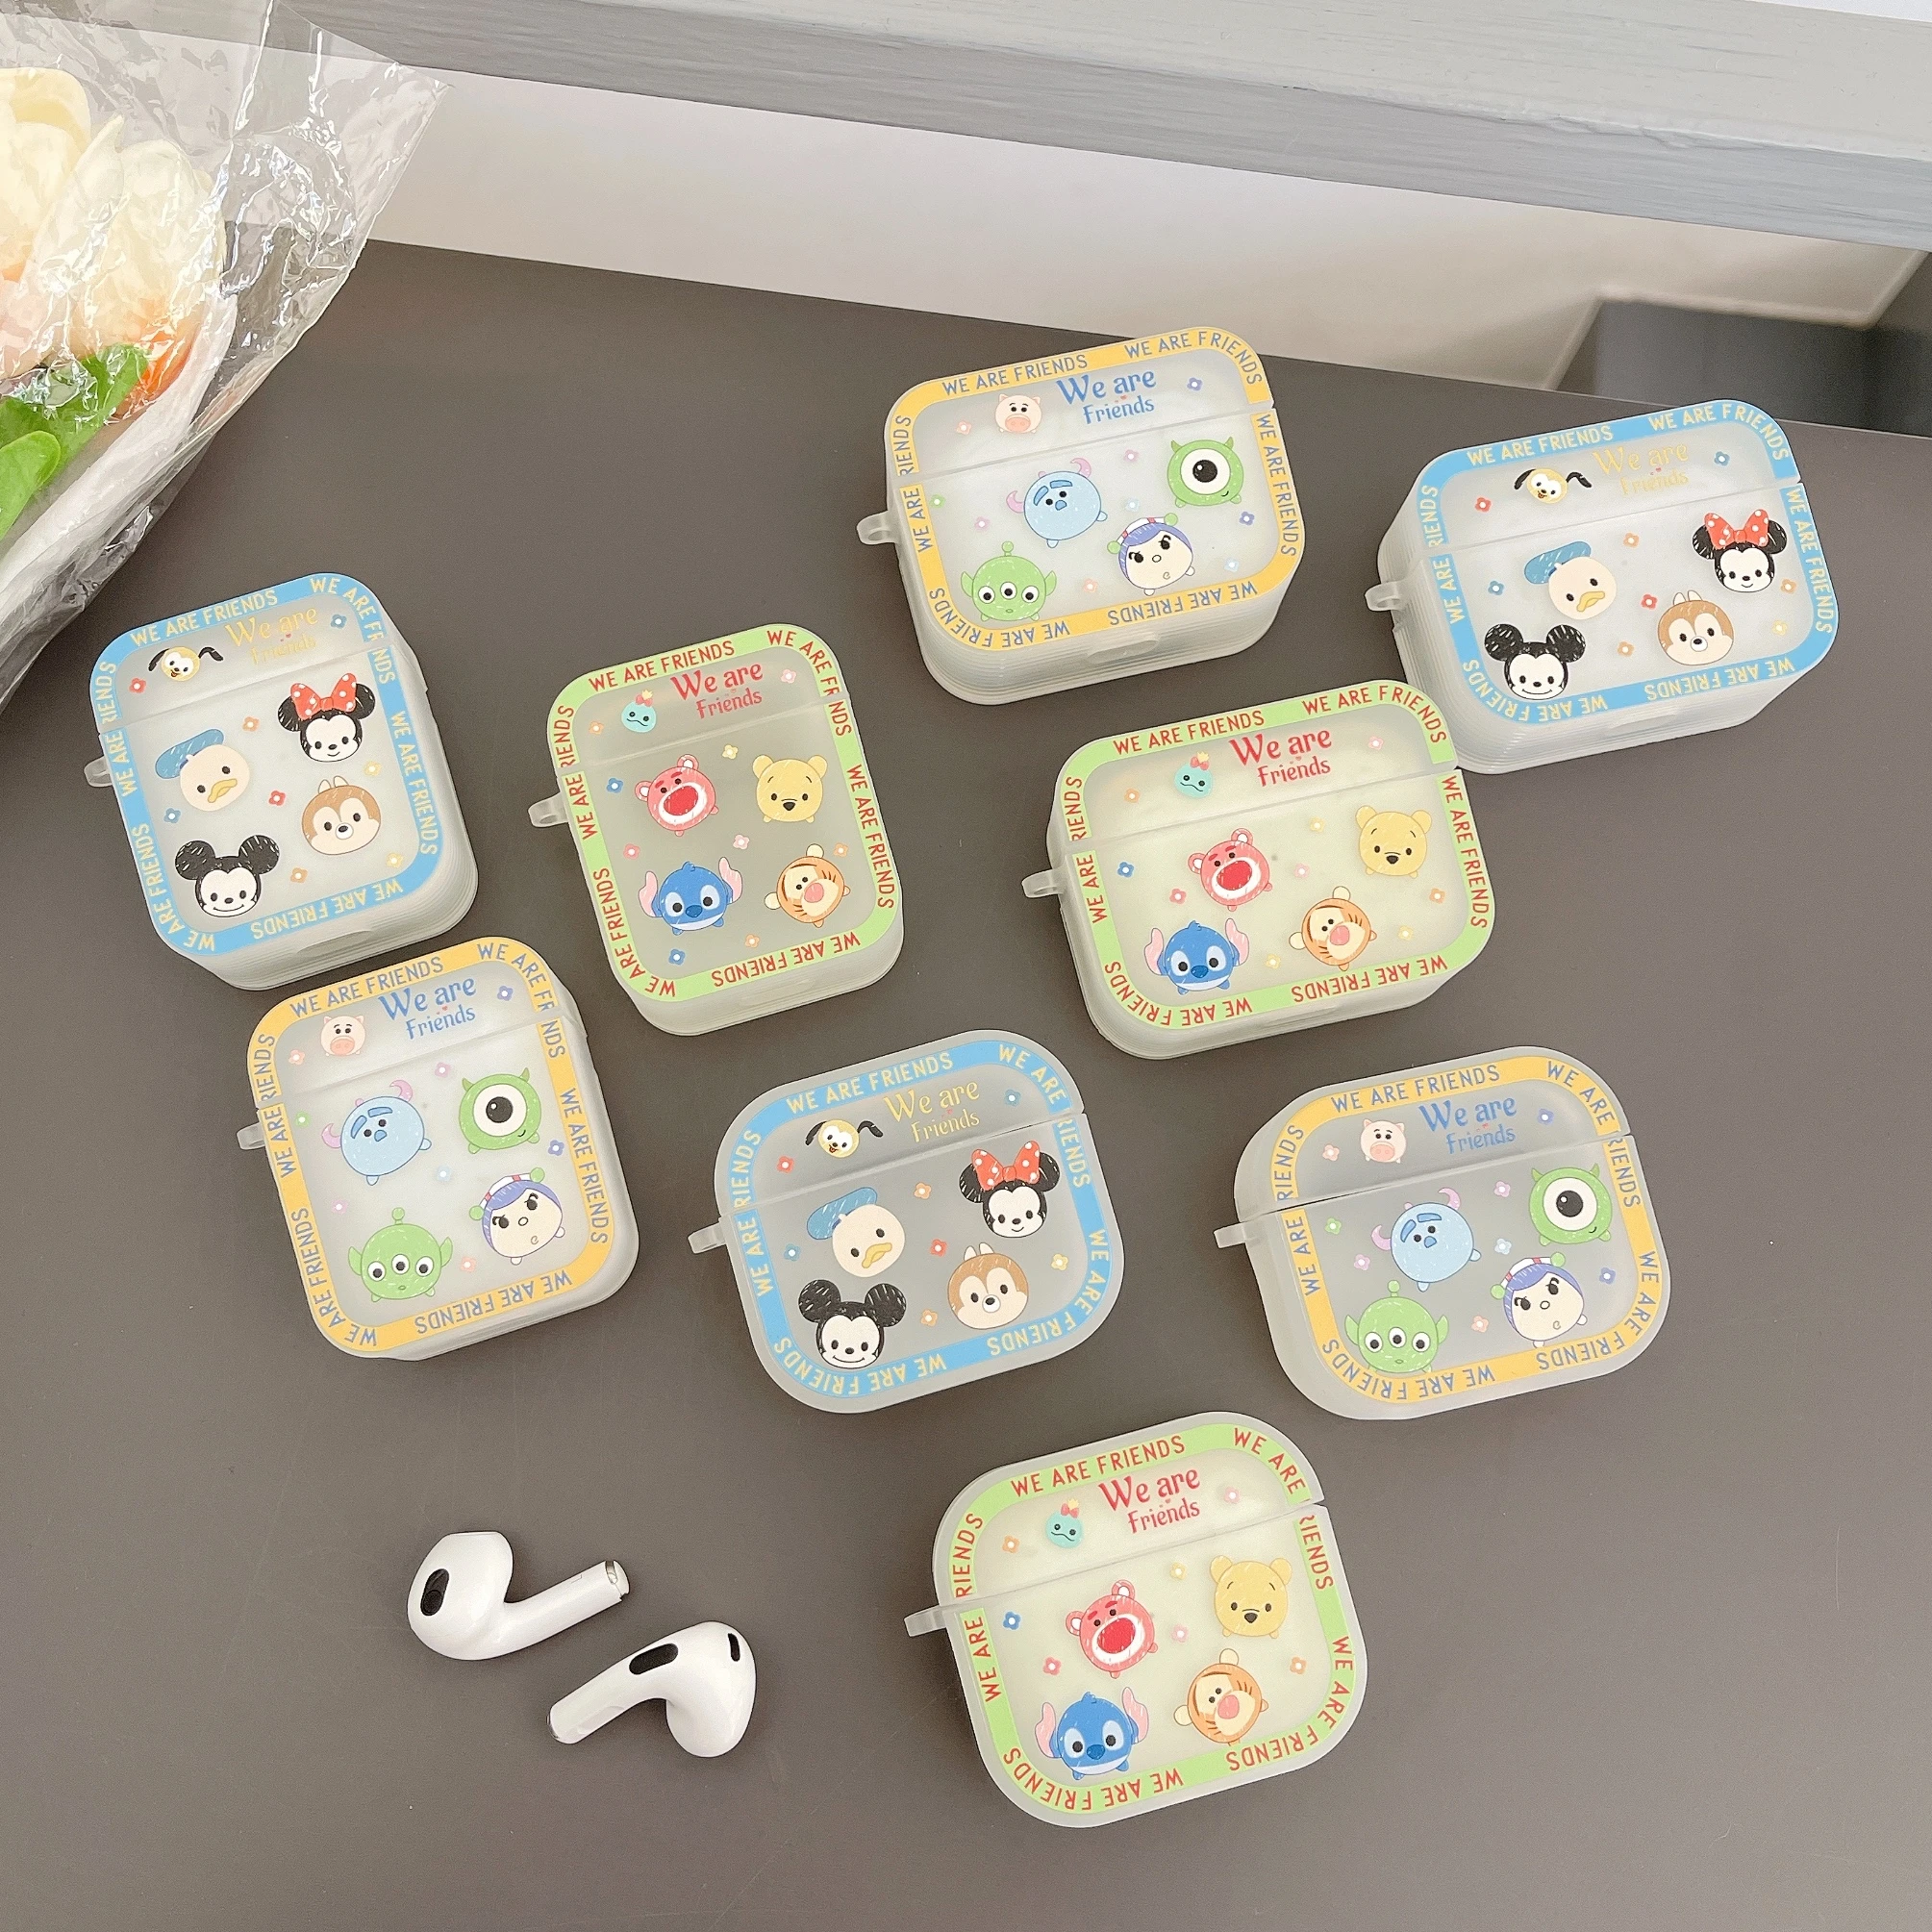 

Cover for Apple AirPods 1 2 3 3rd Case for AirPods Pro Case Cute Cartoon Mickey Minnie Stitch Mermaid Earphone Case Accessories